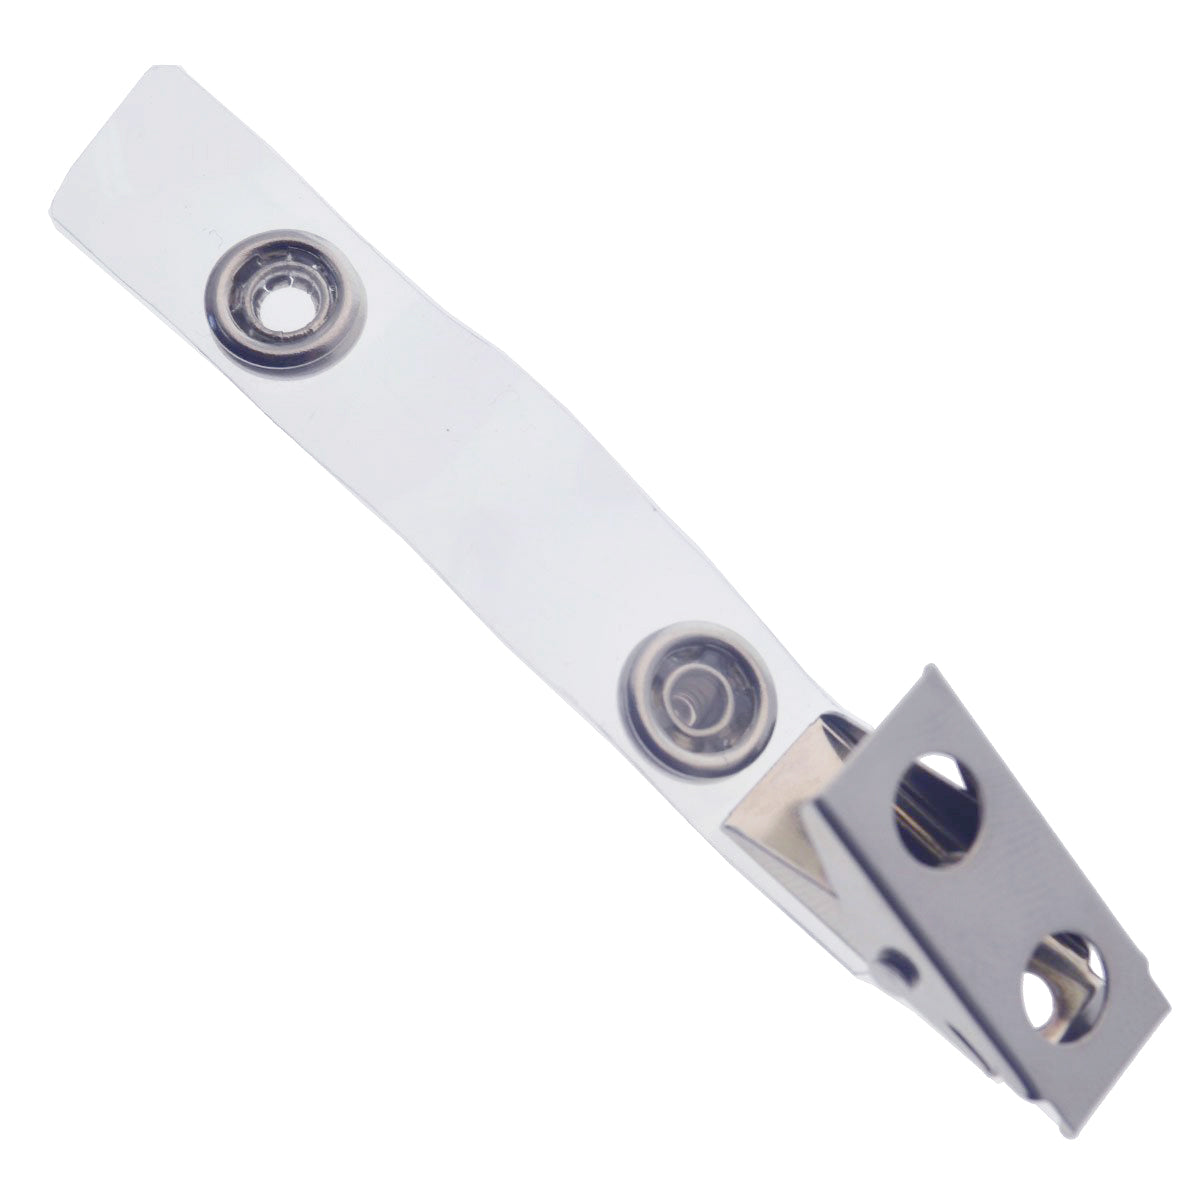 An ID Badge Strap Clip (Industry Standard Clip) featuring two circular holes and a hook attachment, displayed on a white background.